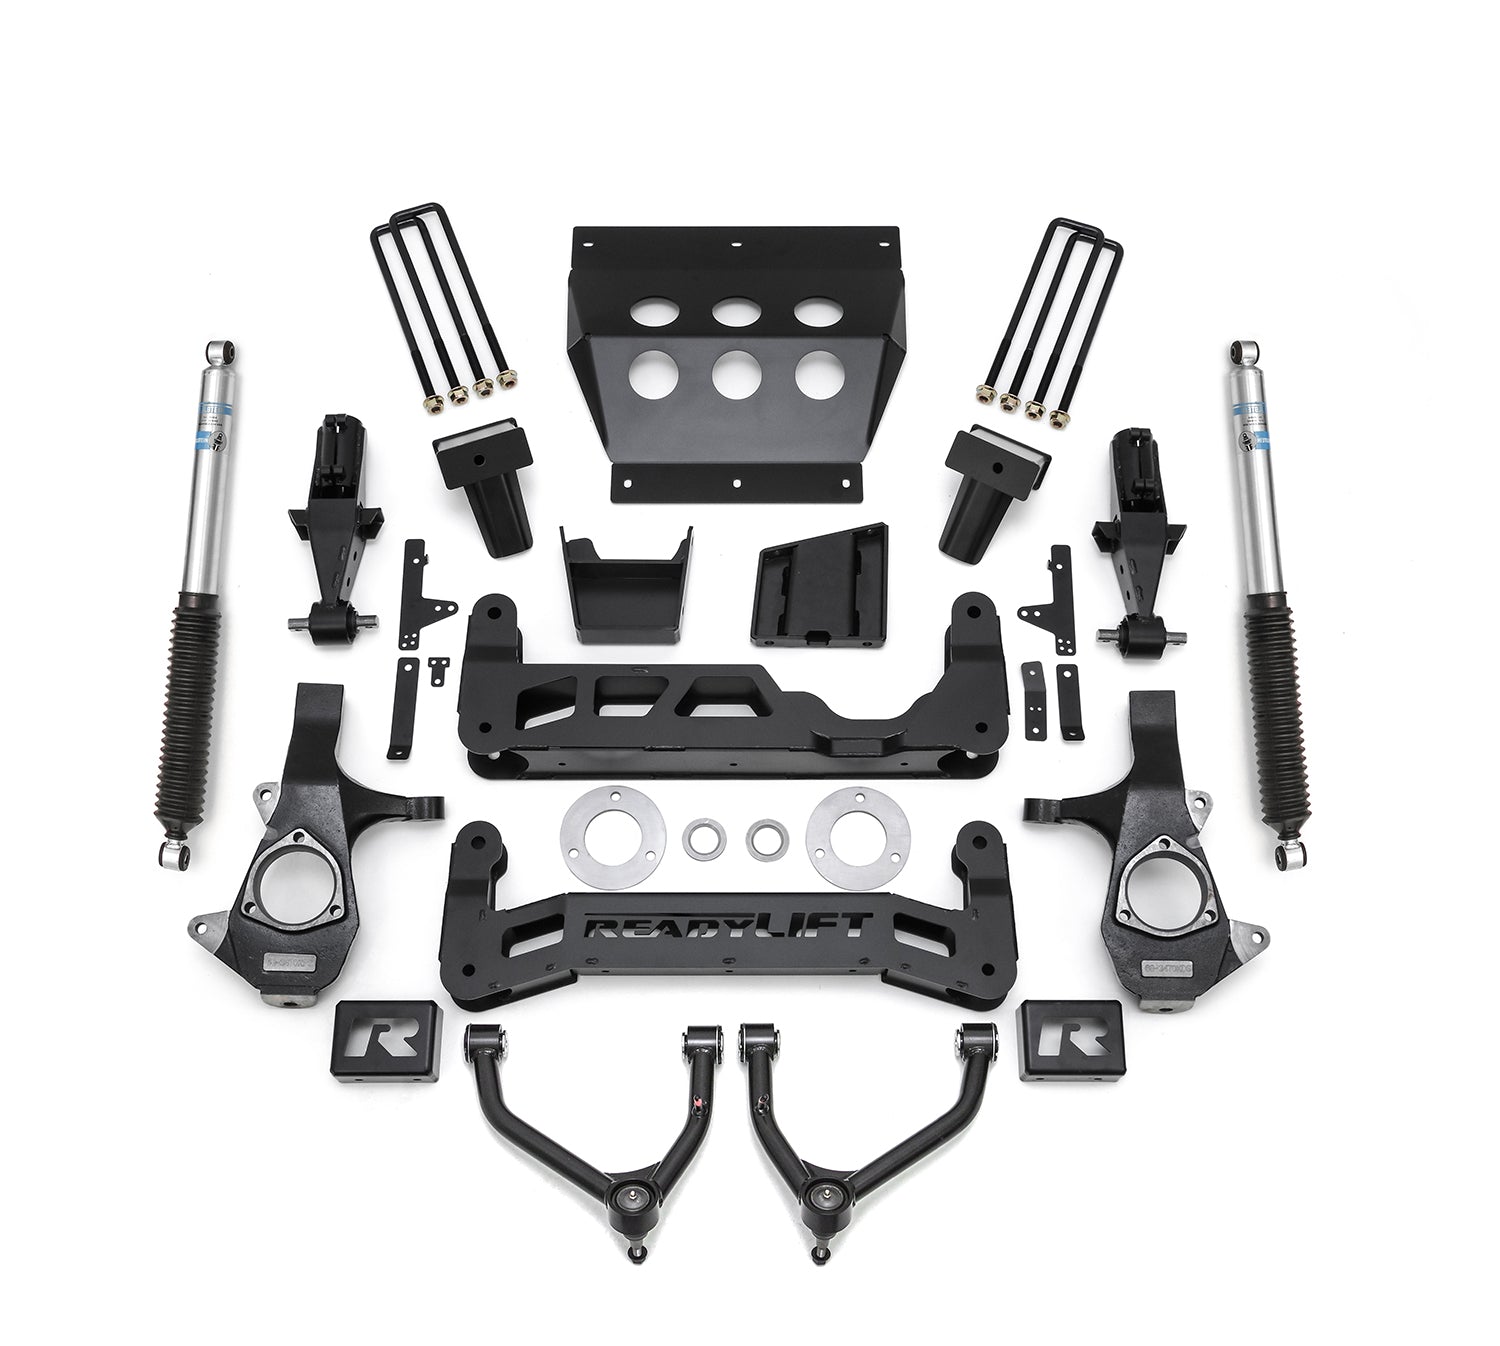 ReadyLift 44-3472 2014-2018 7'' Big Lift Kit with Upper Control Arms for Stamped Steel OE Upper Control Arms with Bilstein Shocks